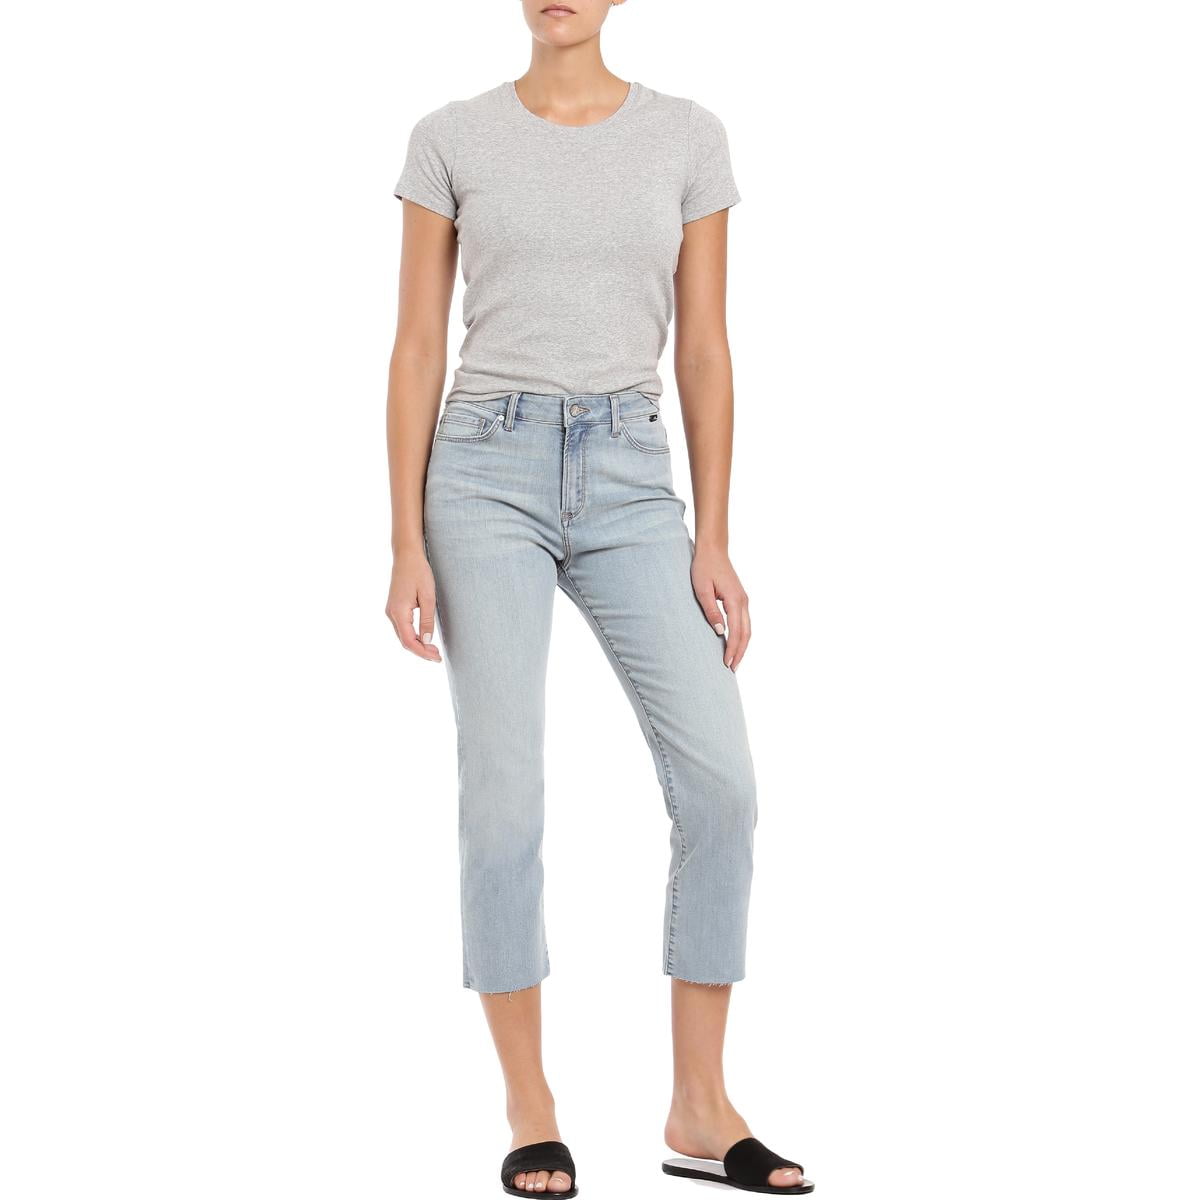 Pistola Womens Nico Blue Distressed Embellished Ankle Jeans 29 BHFO 6886 